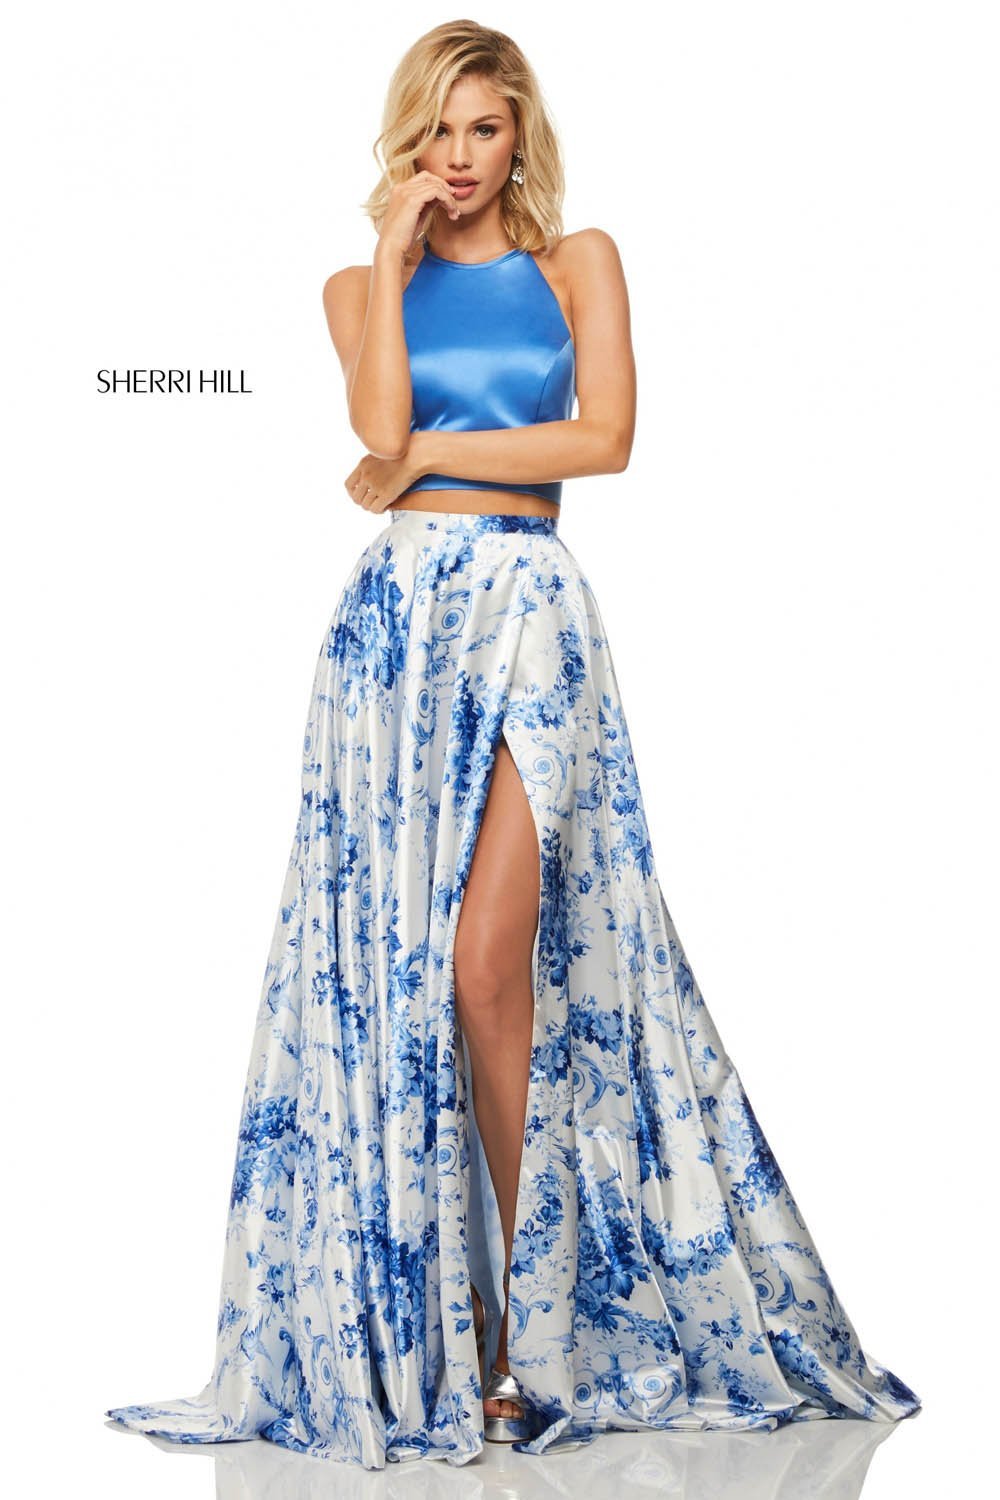 Sherri Hill 52894 dress images in these colors: Blue Ivory Print.